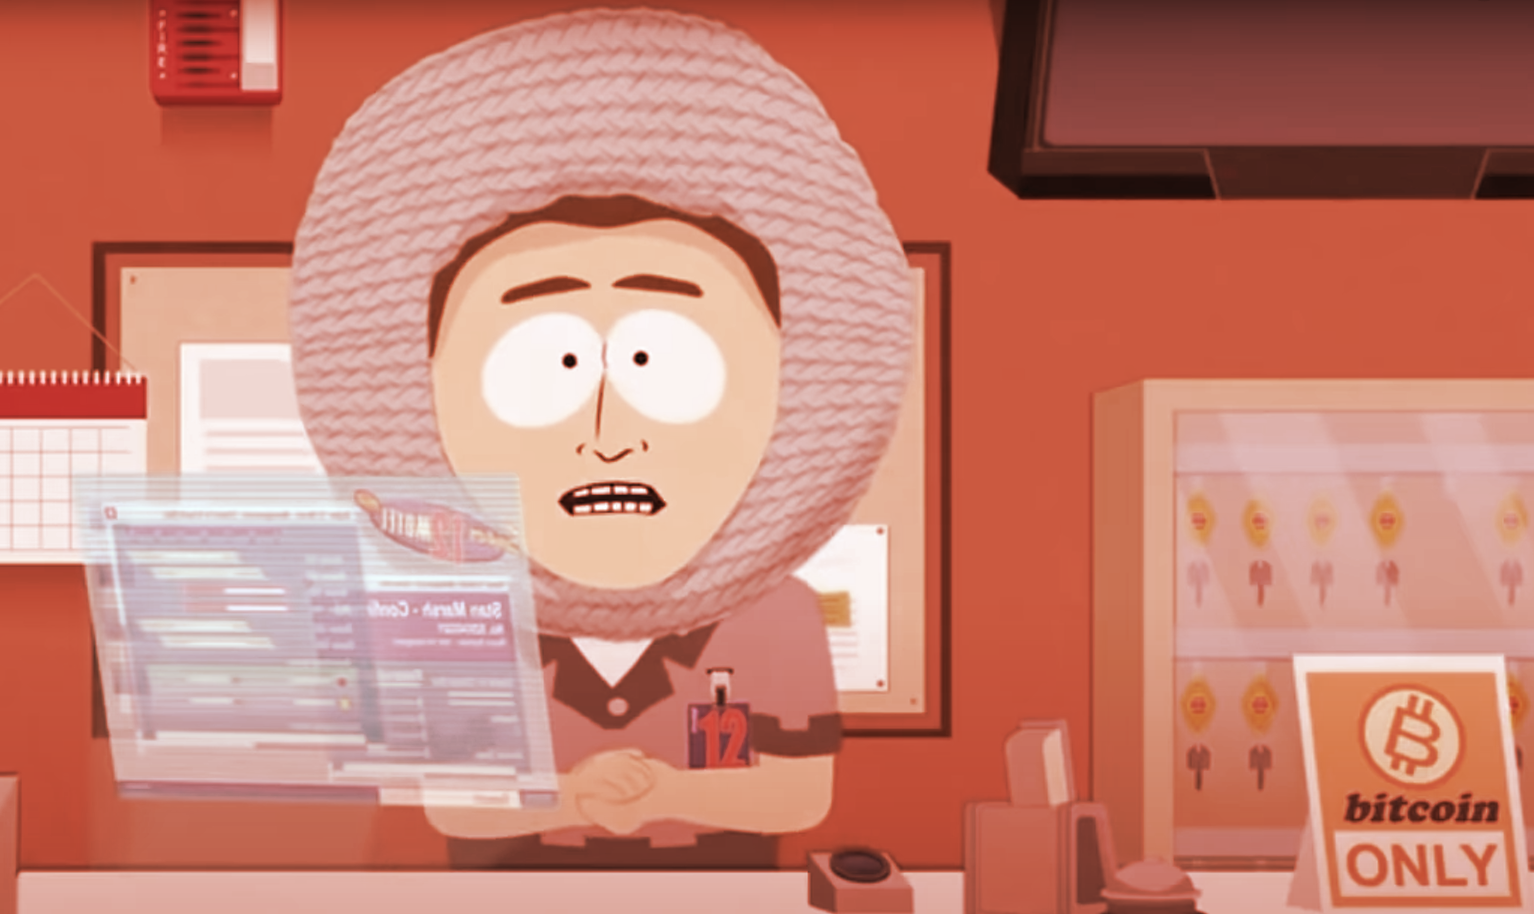 South Park takes a critical stance of Bitcoin in recent episode. Image: South Park